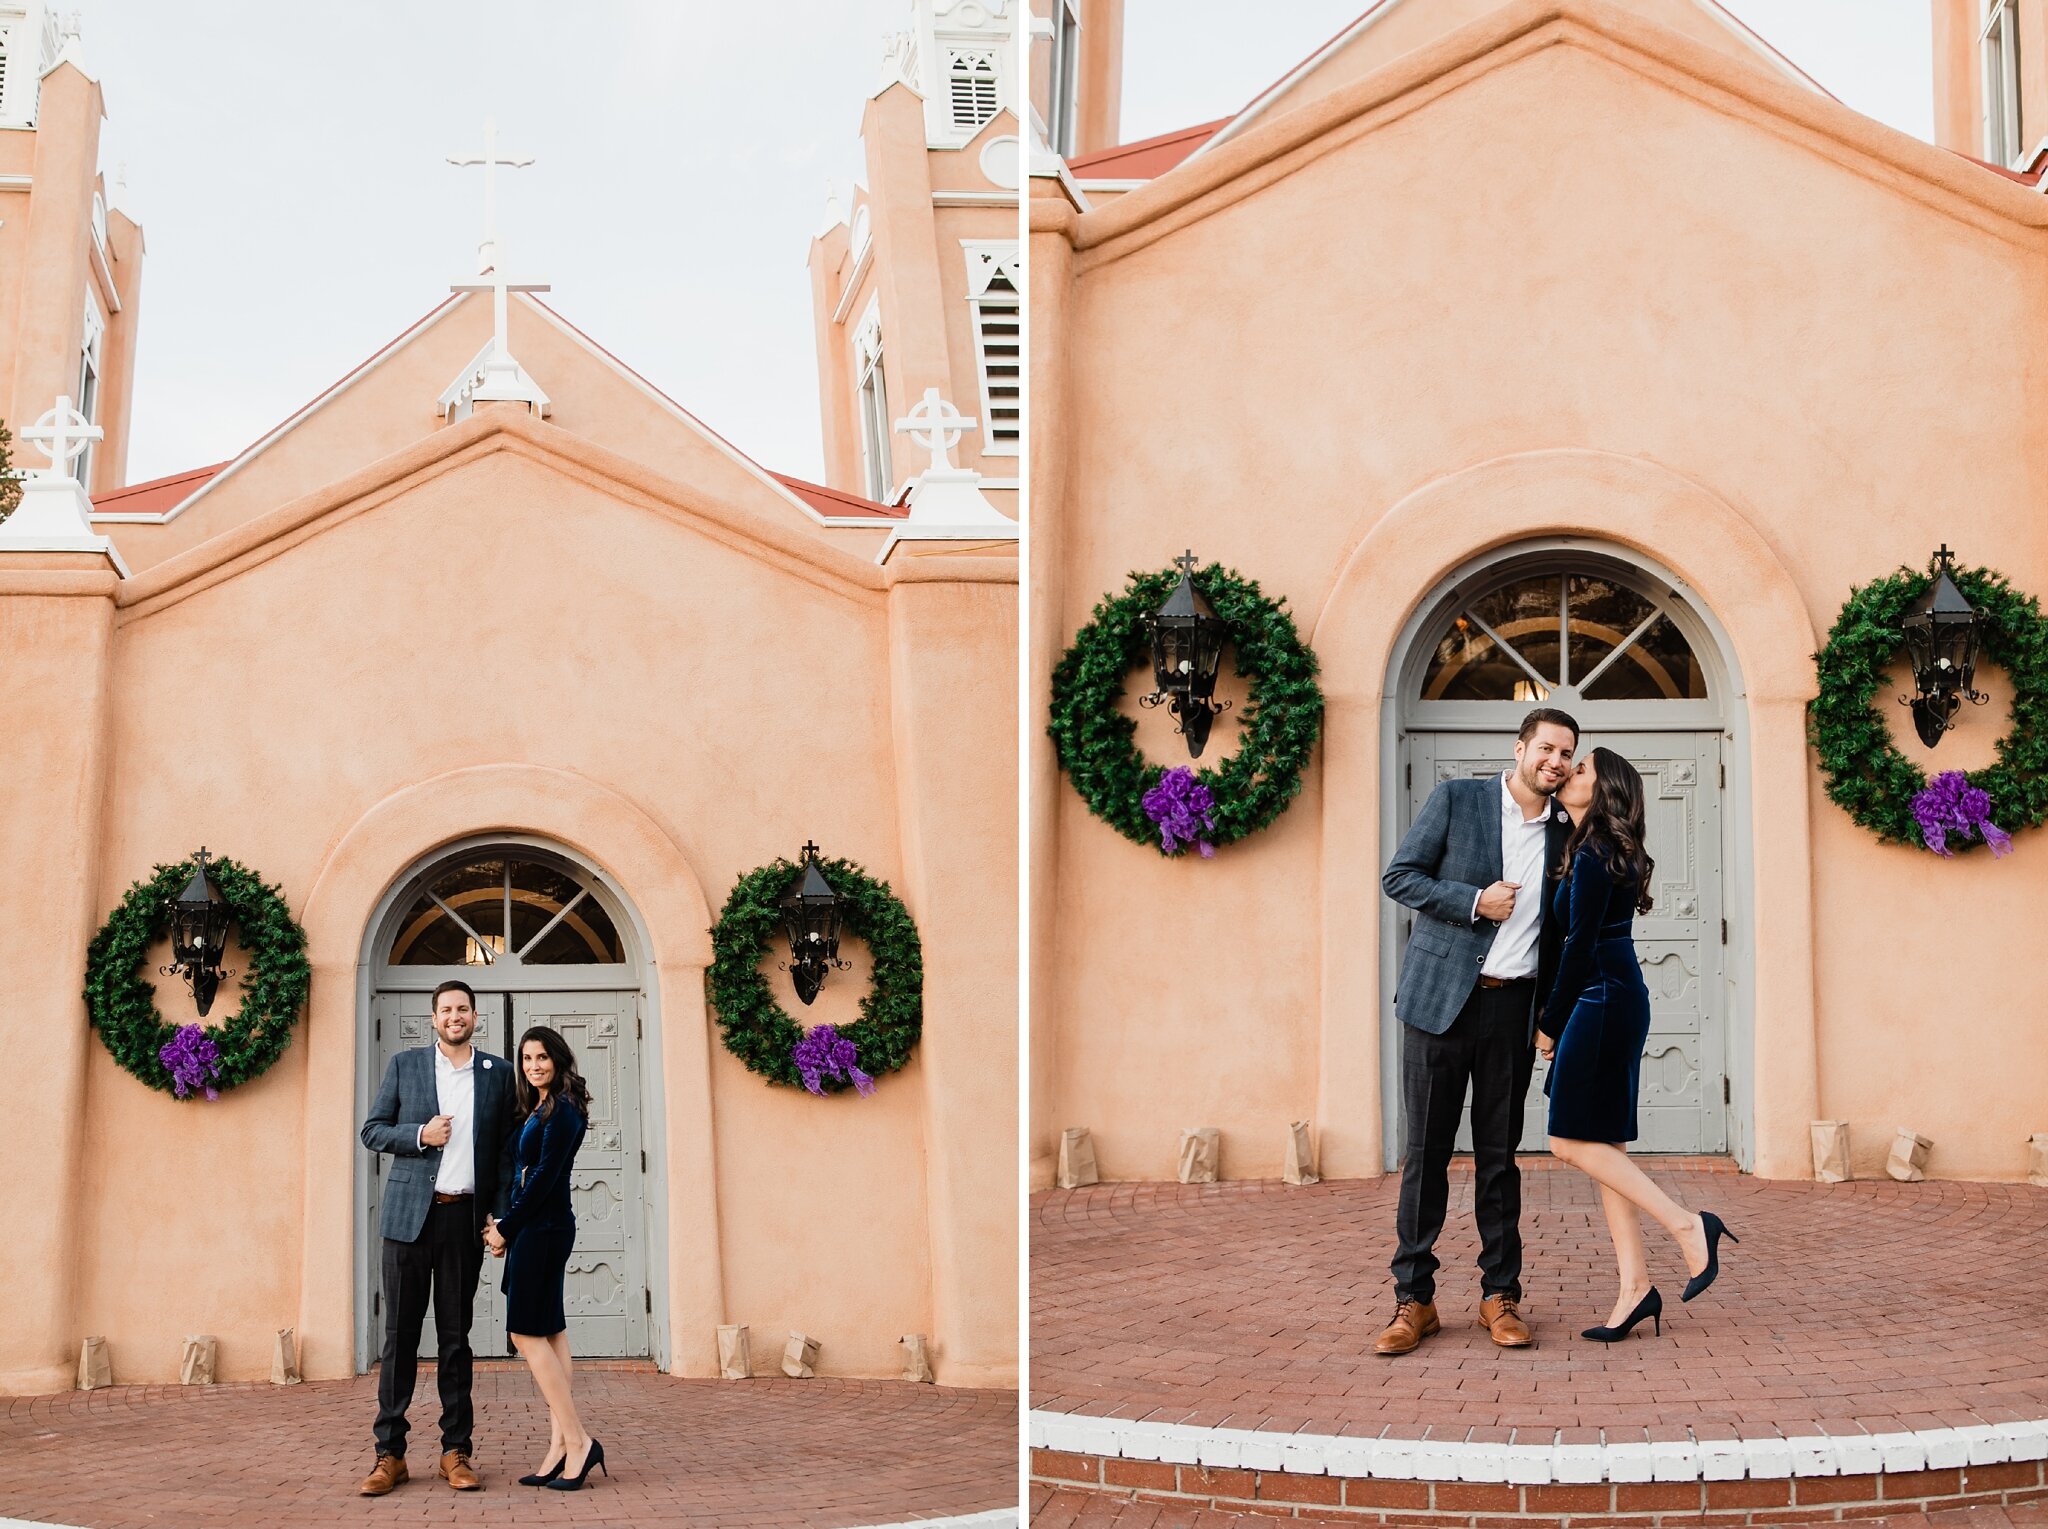 Alicia+lucia+photography+-+albuquerque+wedding+photographer+-+santa+fe+wedding+photography+-+new+mexico+wedding+photographer+-+new+mexico+wedding+-+albuquerque+engagement+-+old+town+engagement+-+christmas+engagement+-+holiday+engagement_0024.jpg